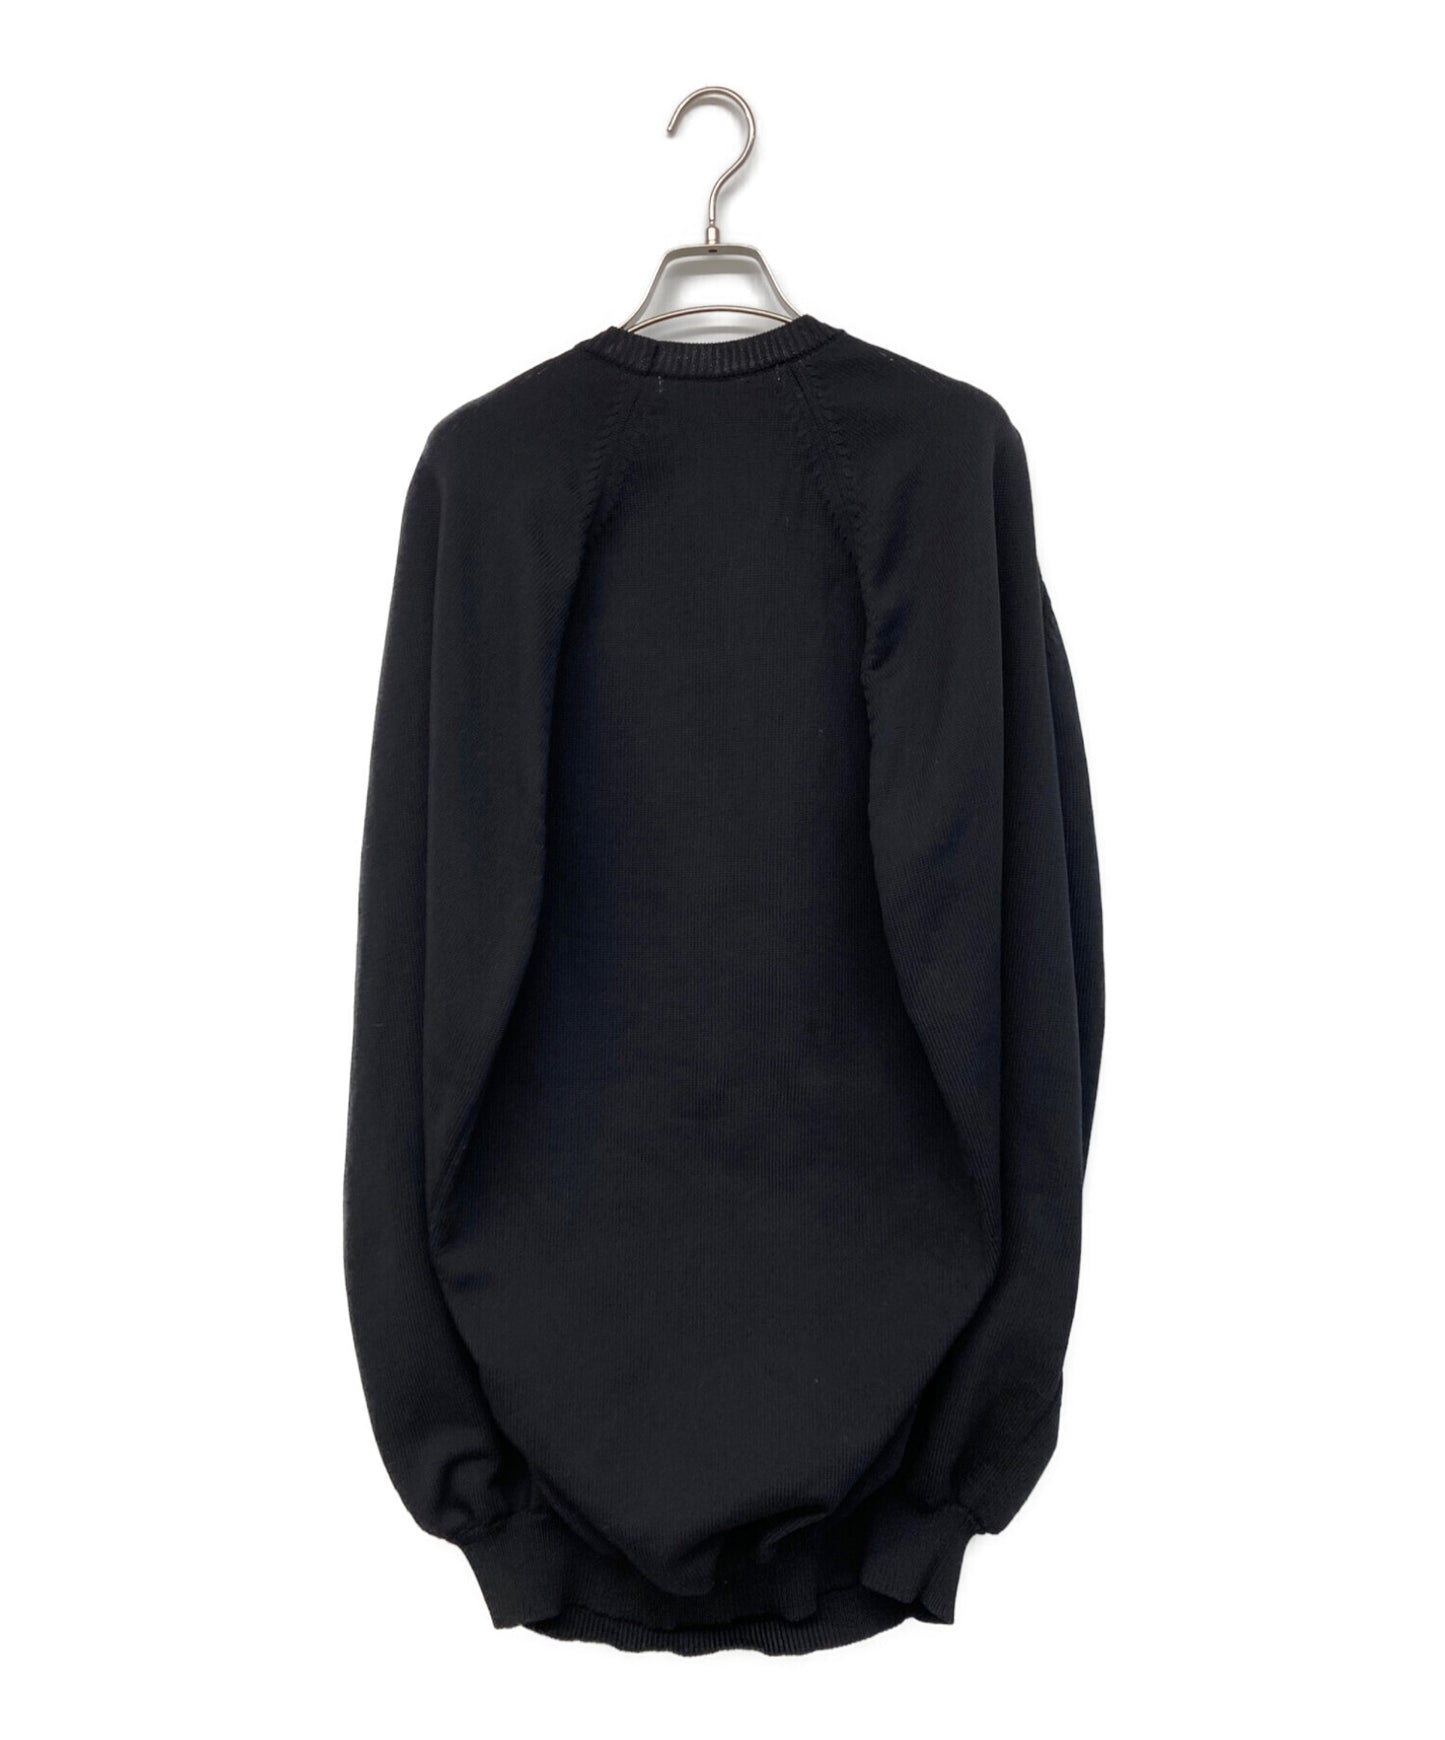 Comme des Garcons 21Aw Circle Knit Pullover ถัก GH-N018